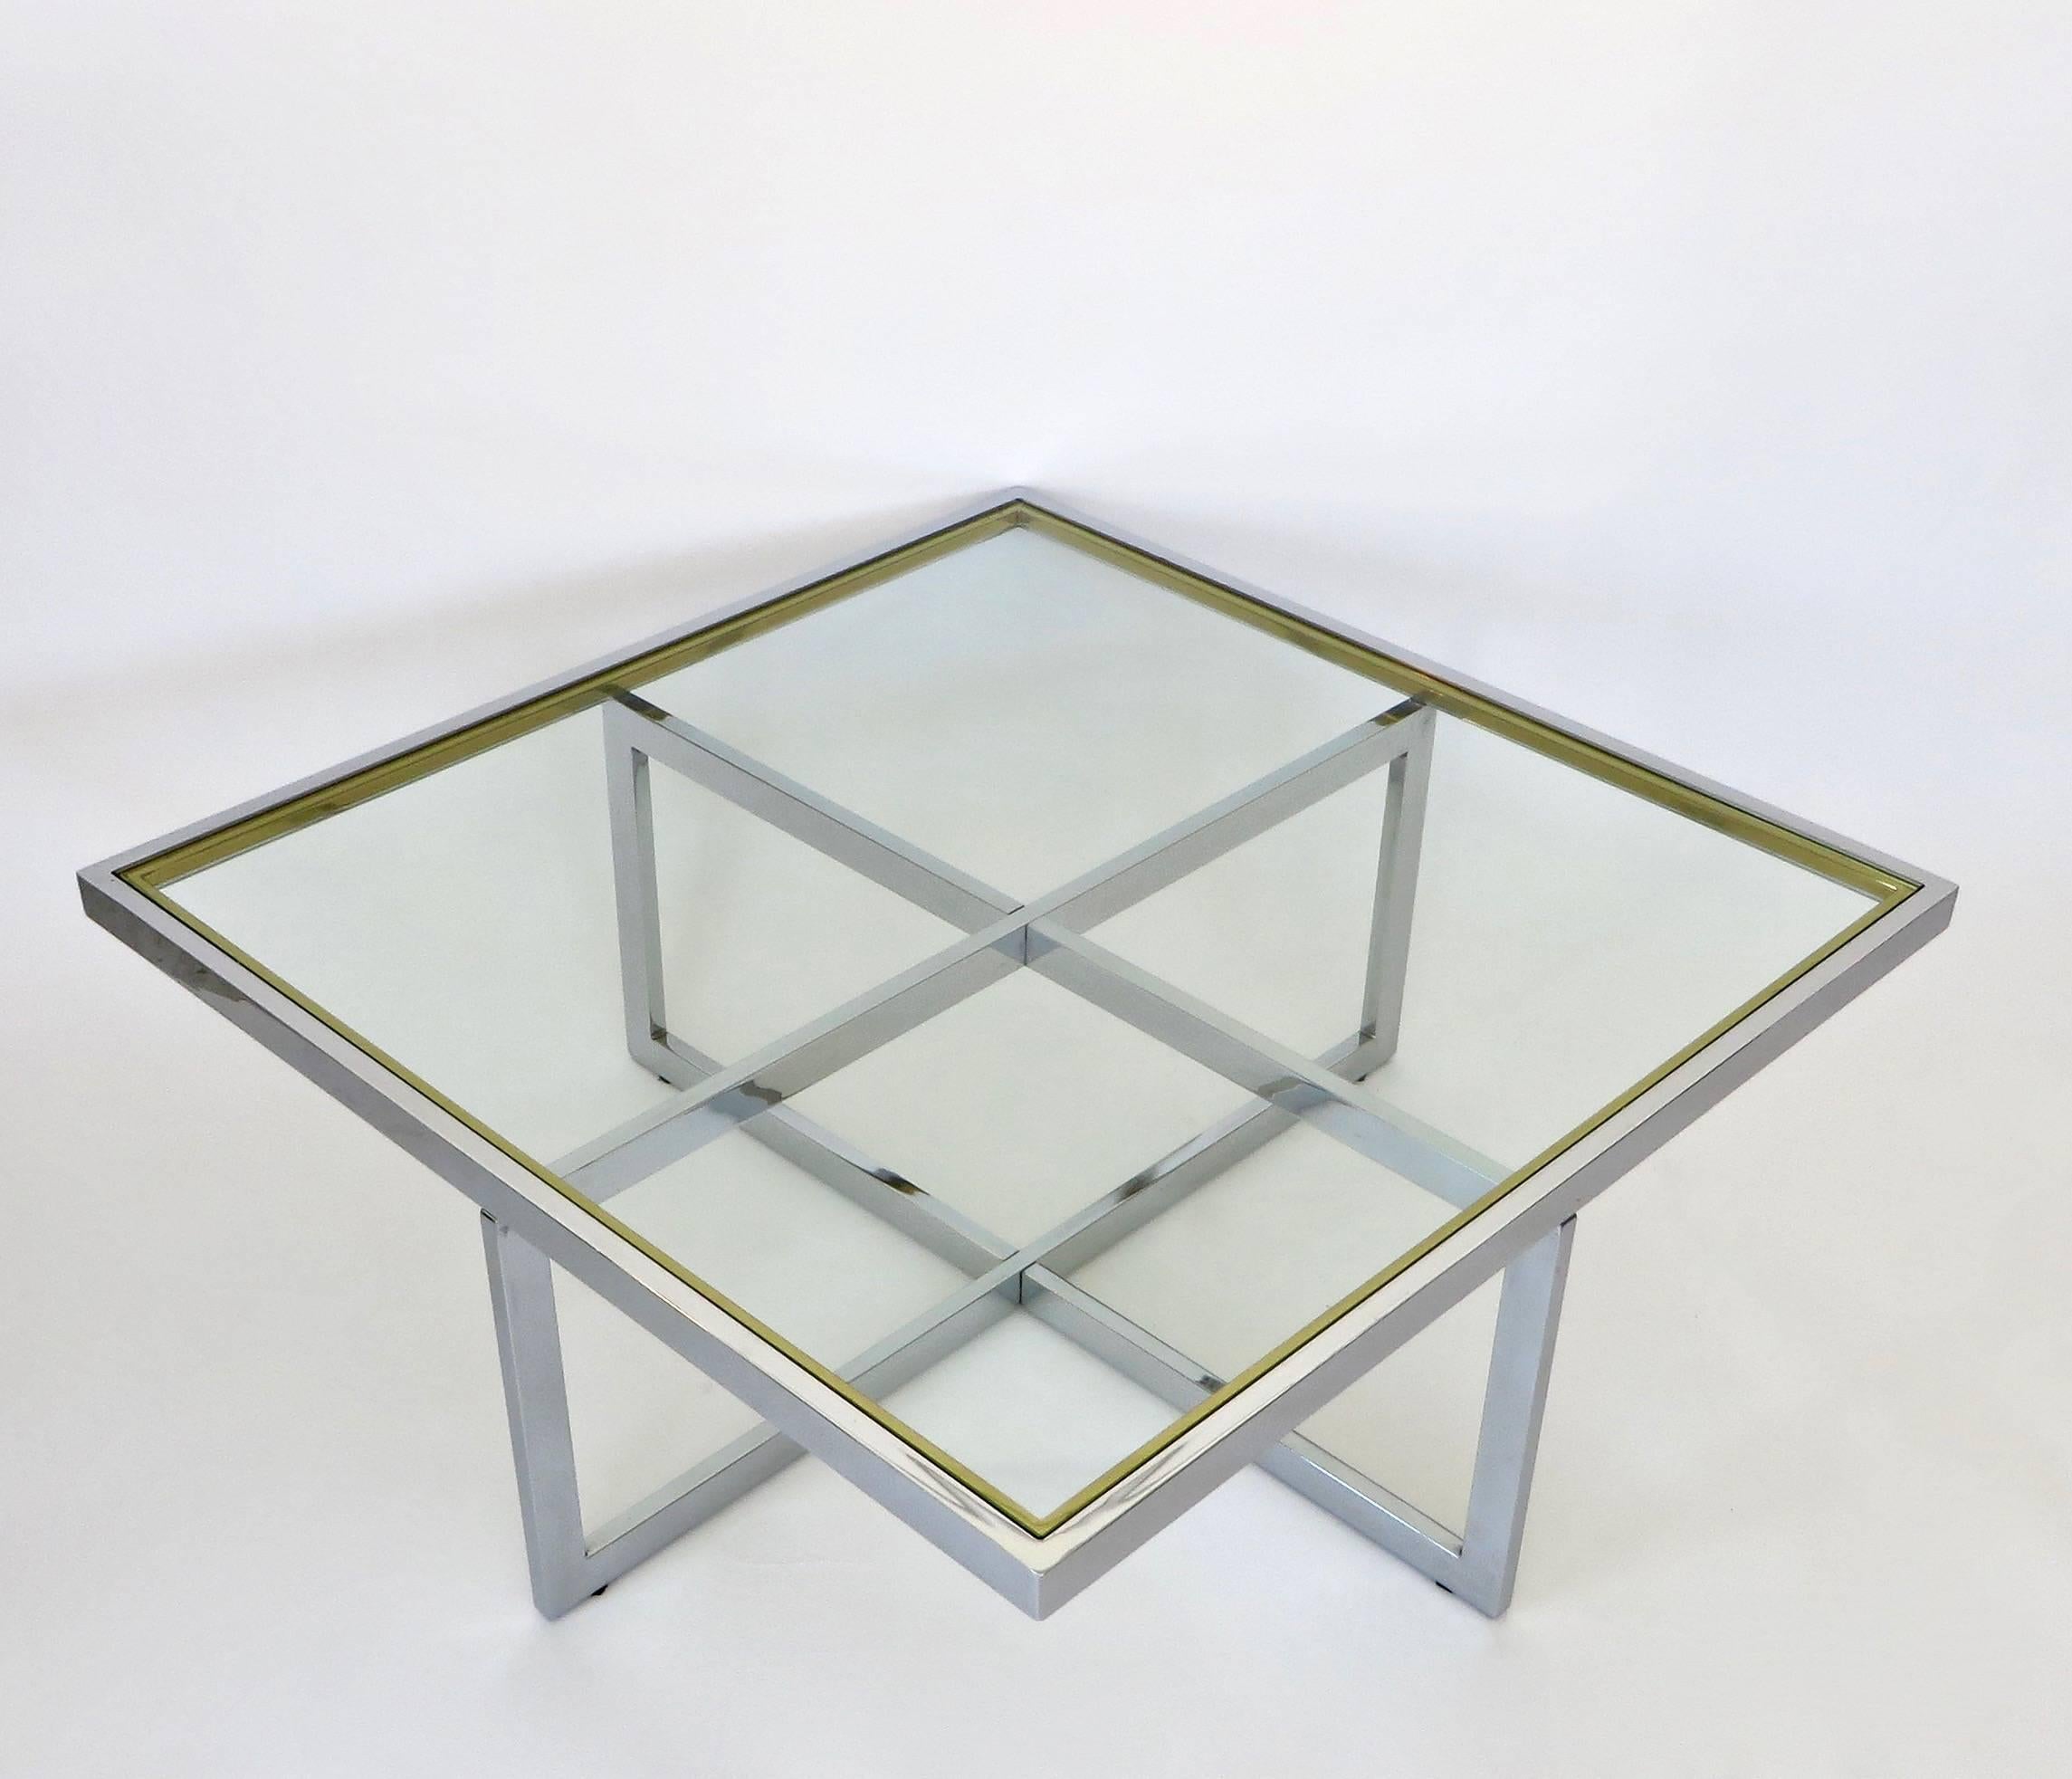 A French chic square chrome and glass coffee table with brass accent by Maison Charles et Fils, circa 1970.
The chrome is the predominant metal in this coffee table with brass trim accent in the top portion. 
No pitting or rusting on the chrome.